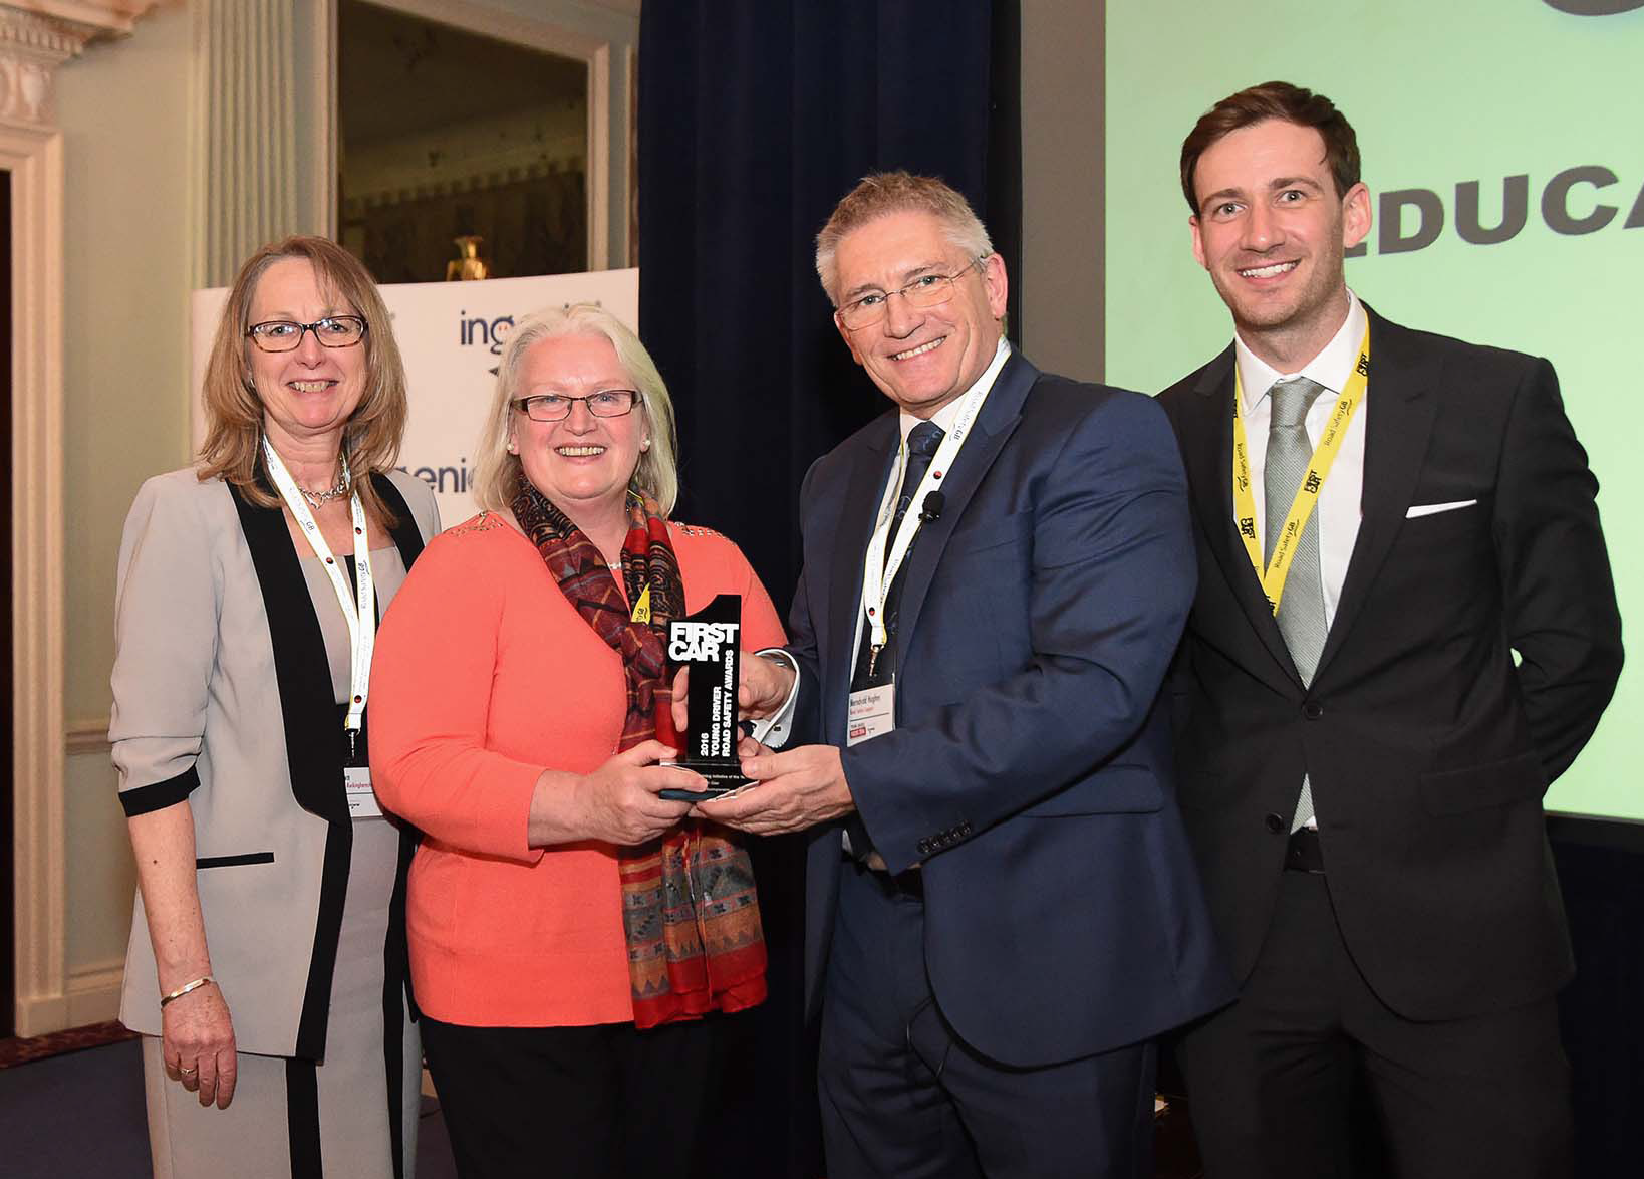 Network Safety Team Award success with ‘Get in Gear’